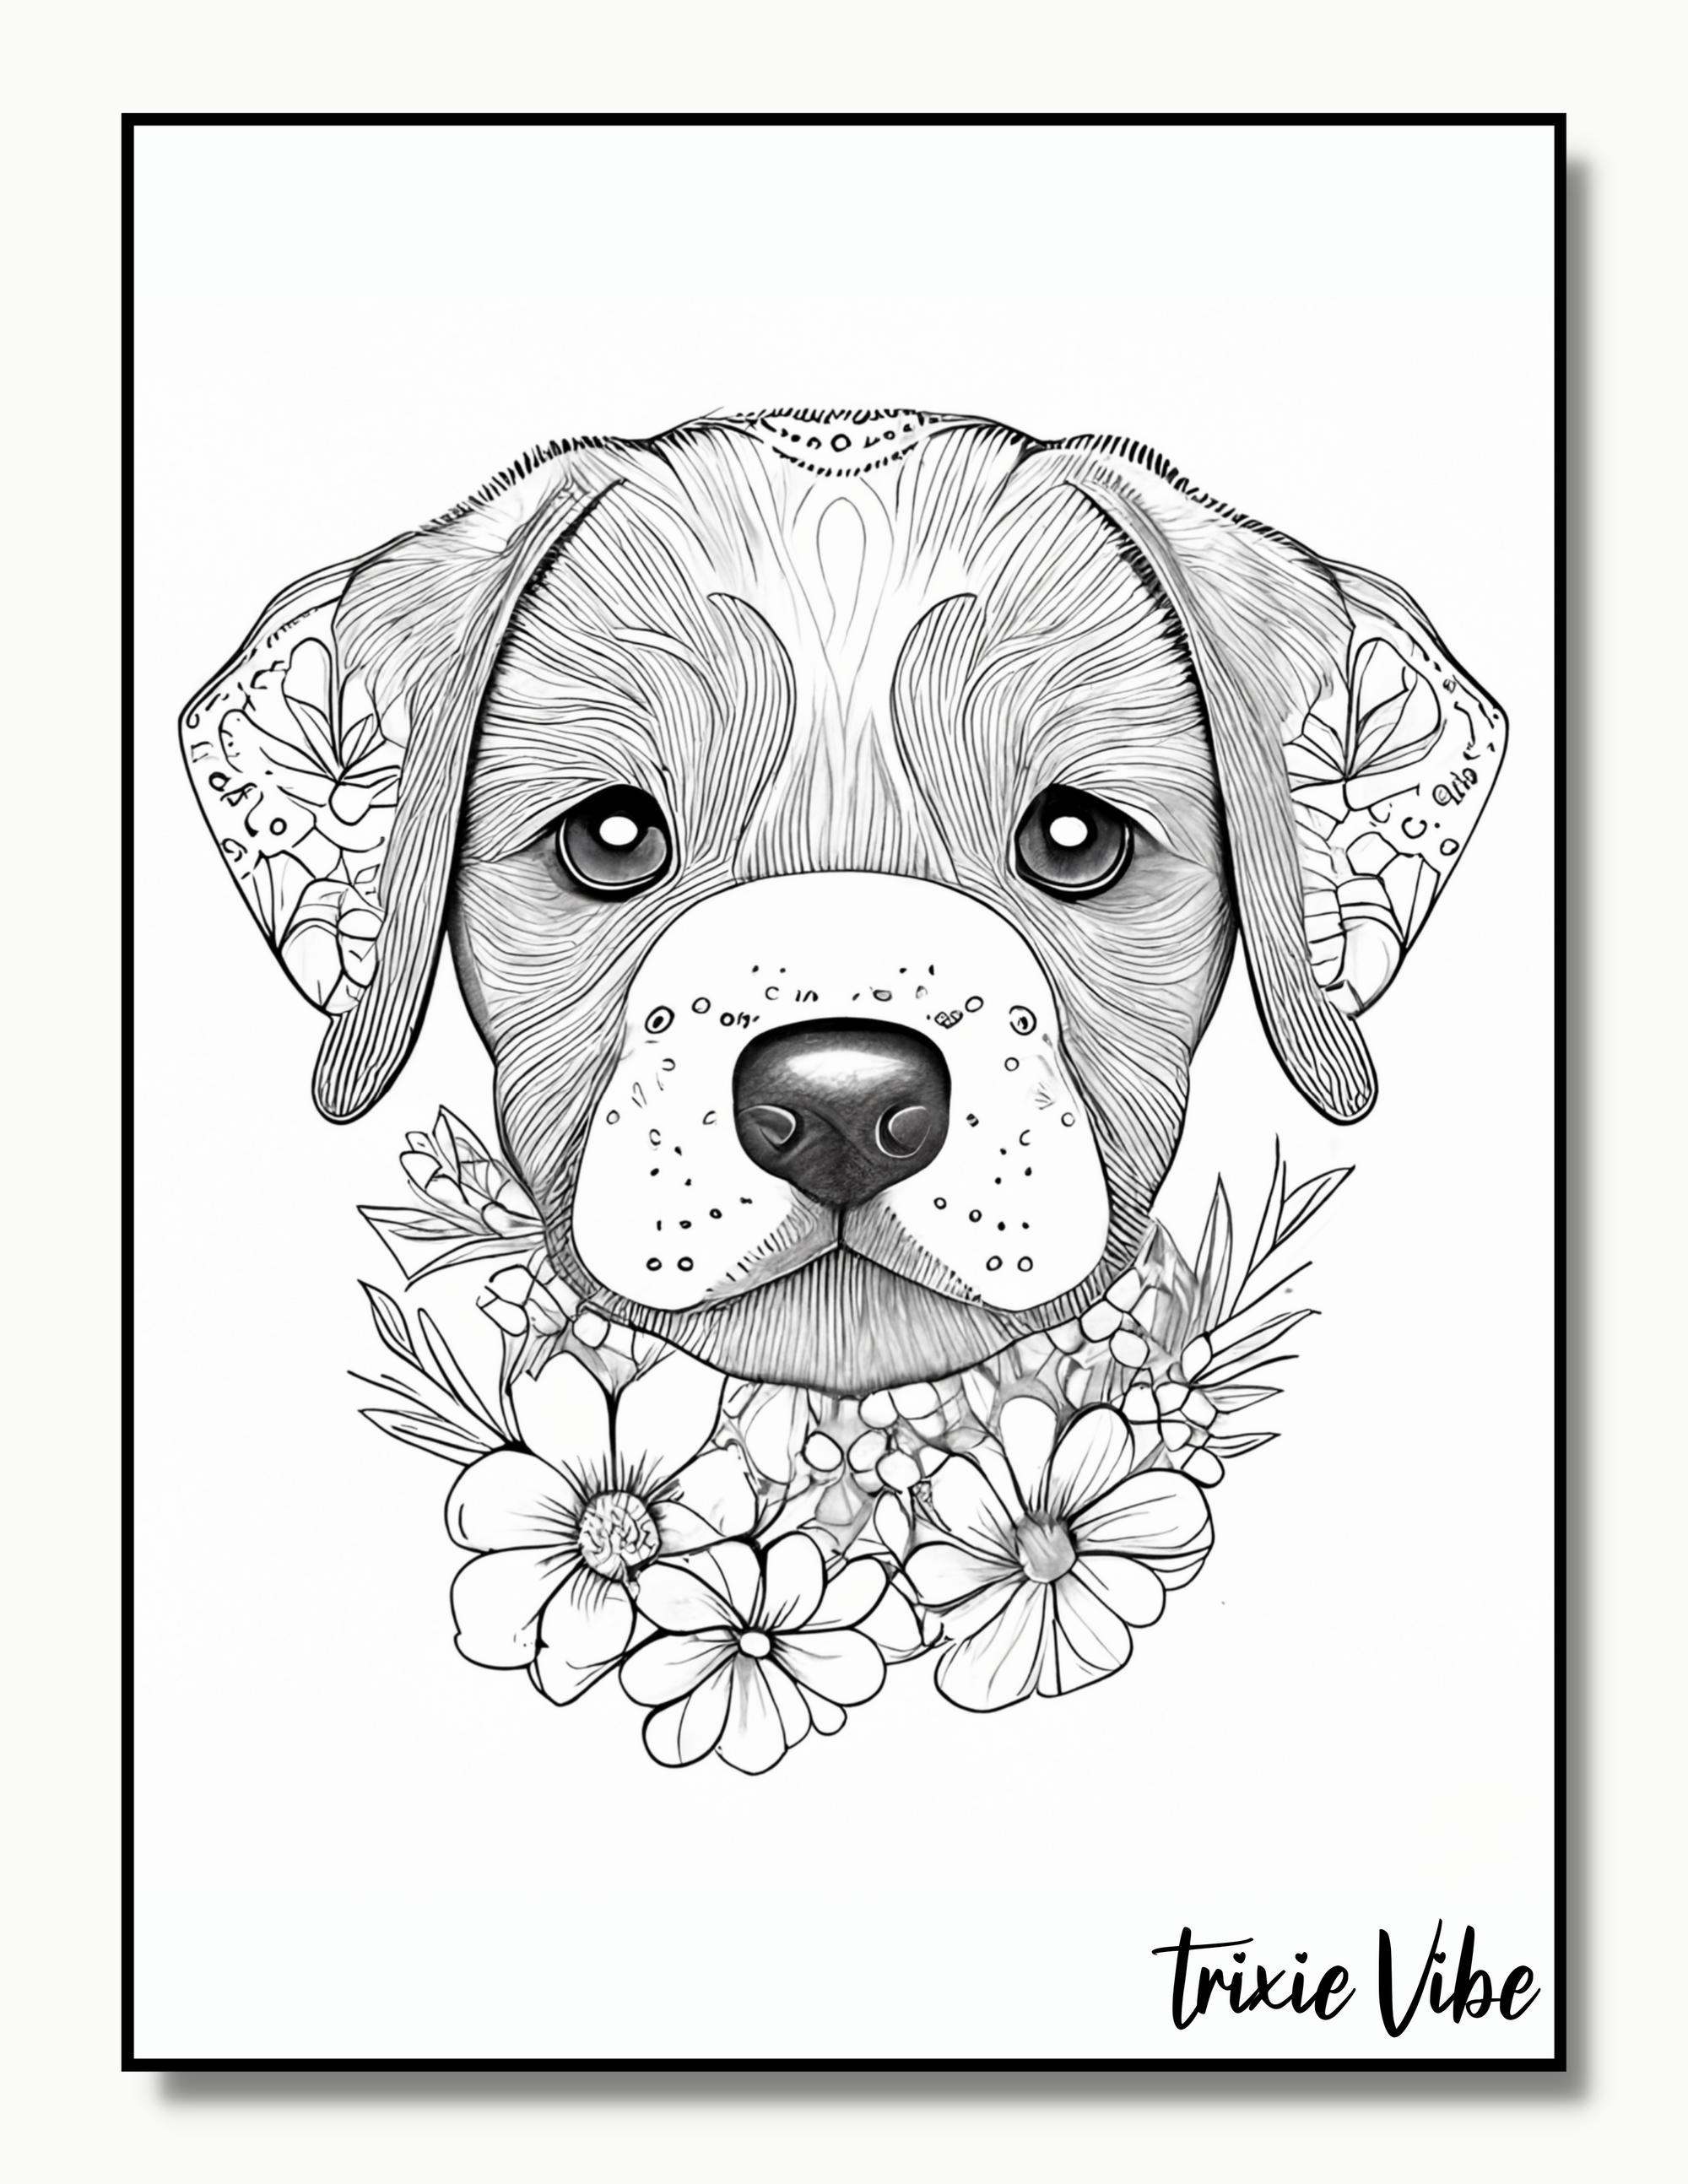 Puppy Coloring Pages for Adults